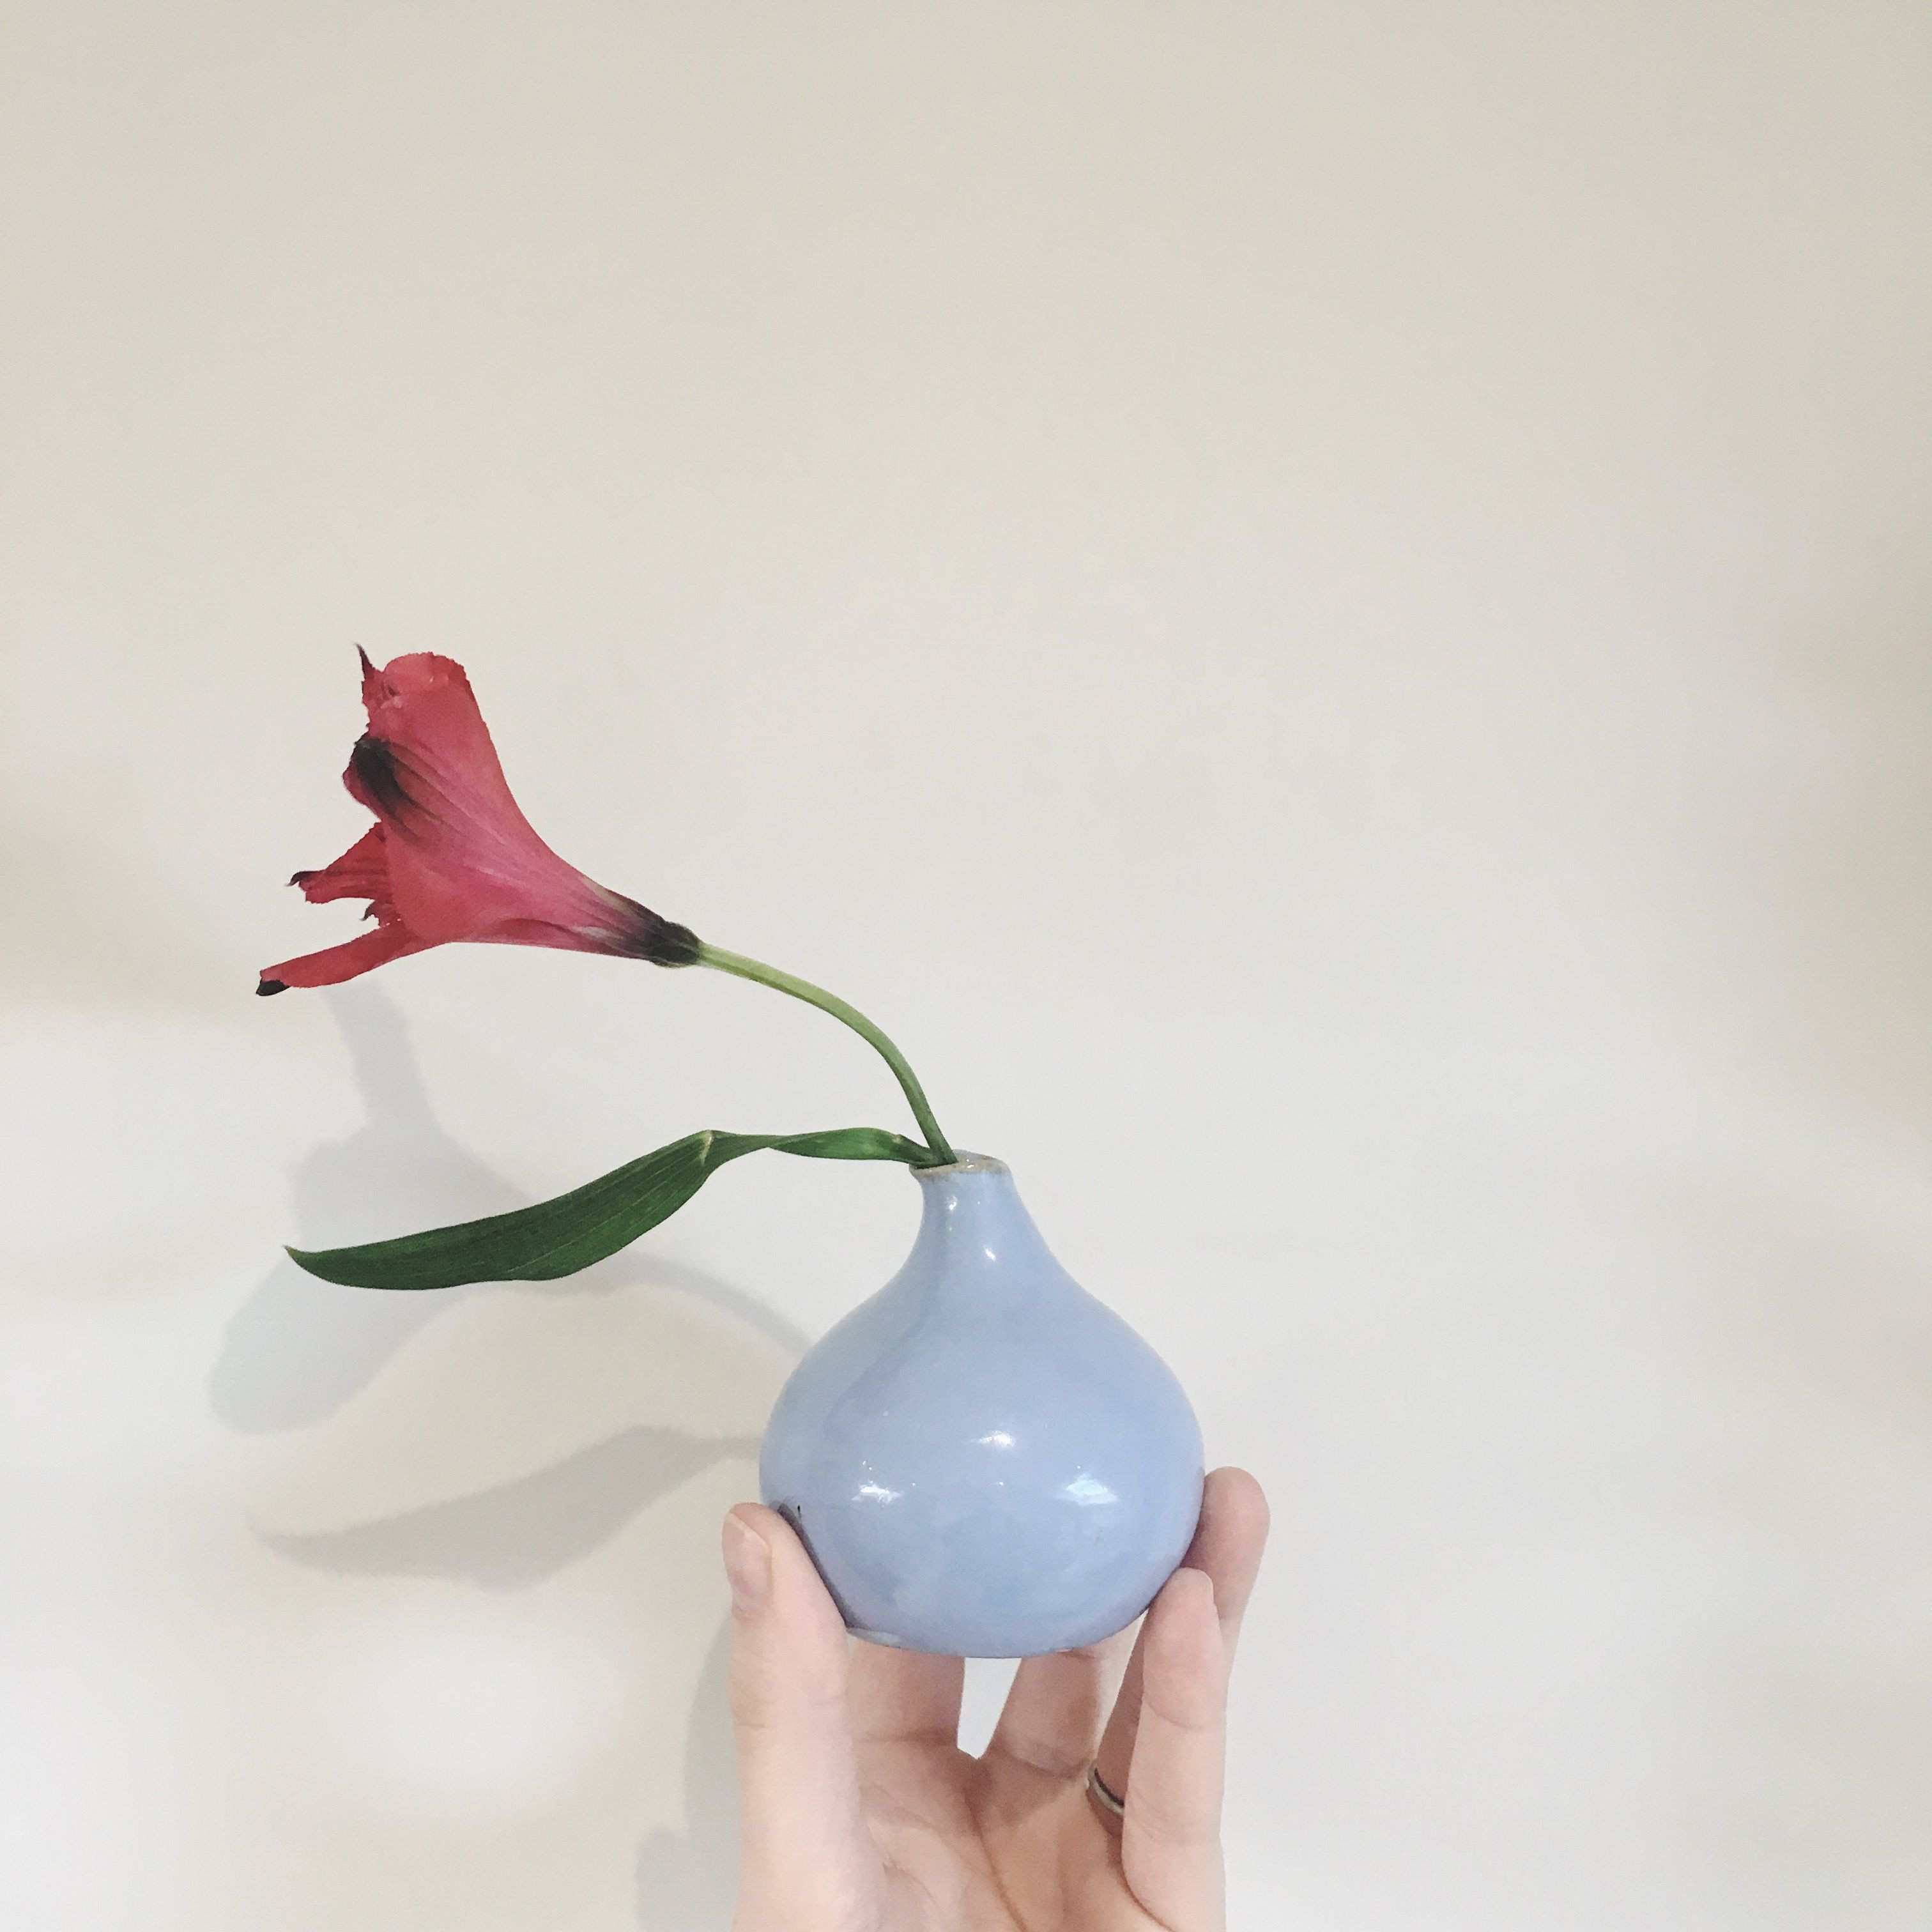 11 Wonderful Ceramic Vases Handmade 2024 free download ceramic vases handmade of 10 50 beautiful sky blue wheel thrown ceramic bud vase handmade in a10 50 beautiful sky blue wheel thrown ceramic bud vase handmade with love in yorkshire